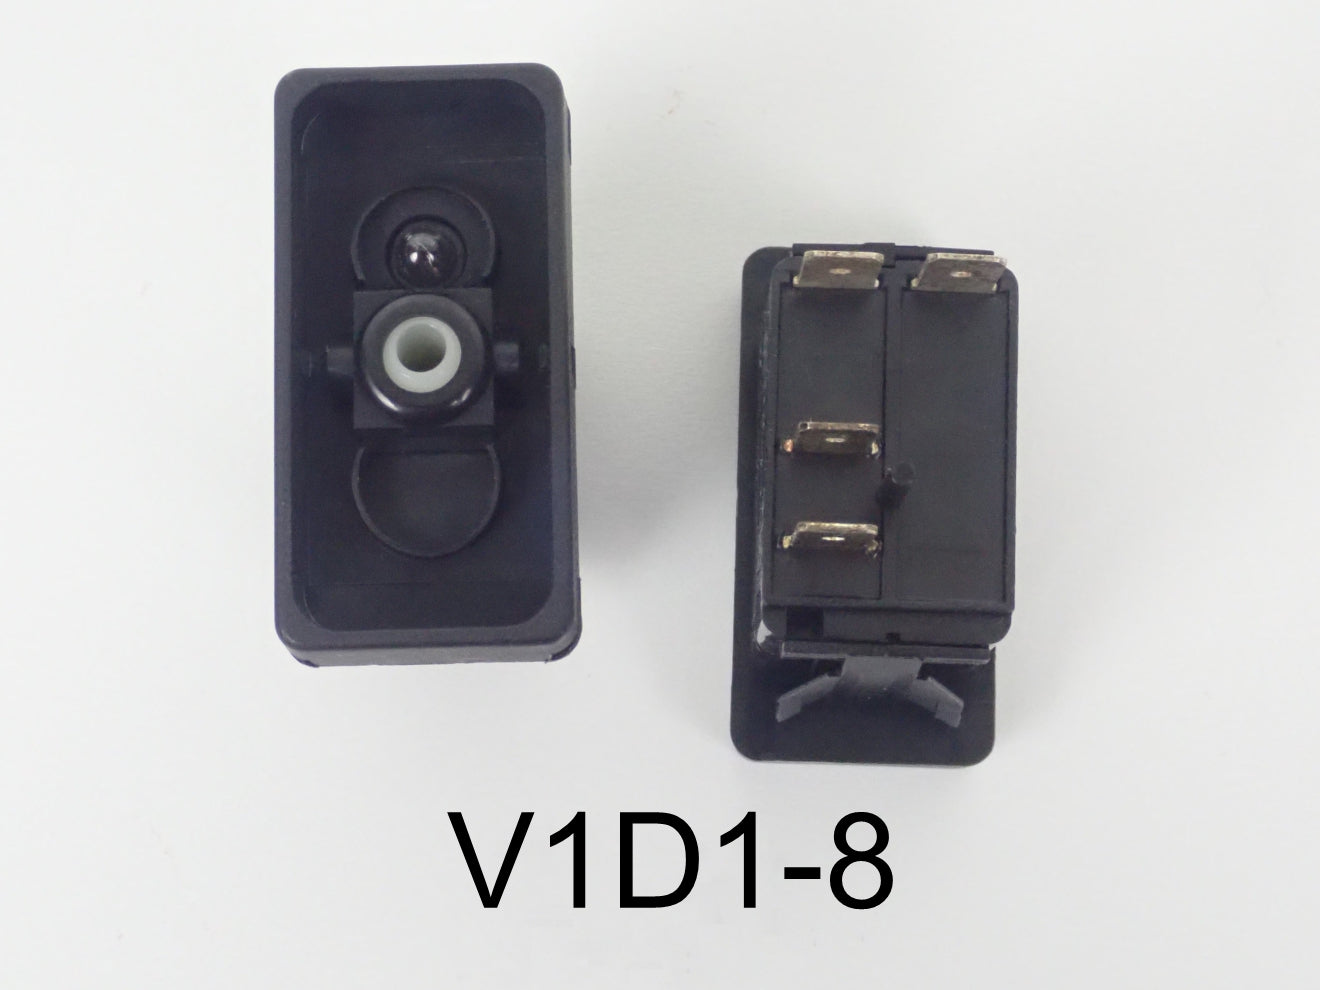 V1D1-8 Carling rocker switch  On/Off w/Independent Lamp.  Raised Bracket.  No Actuator